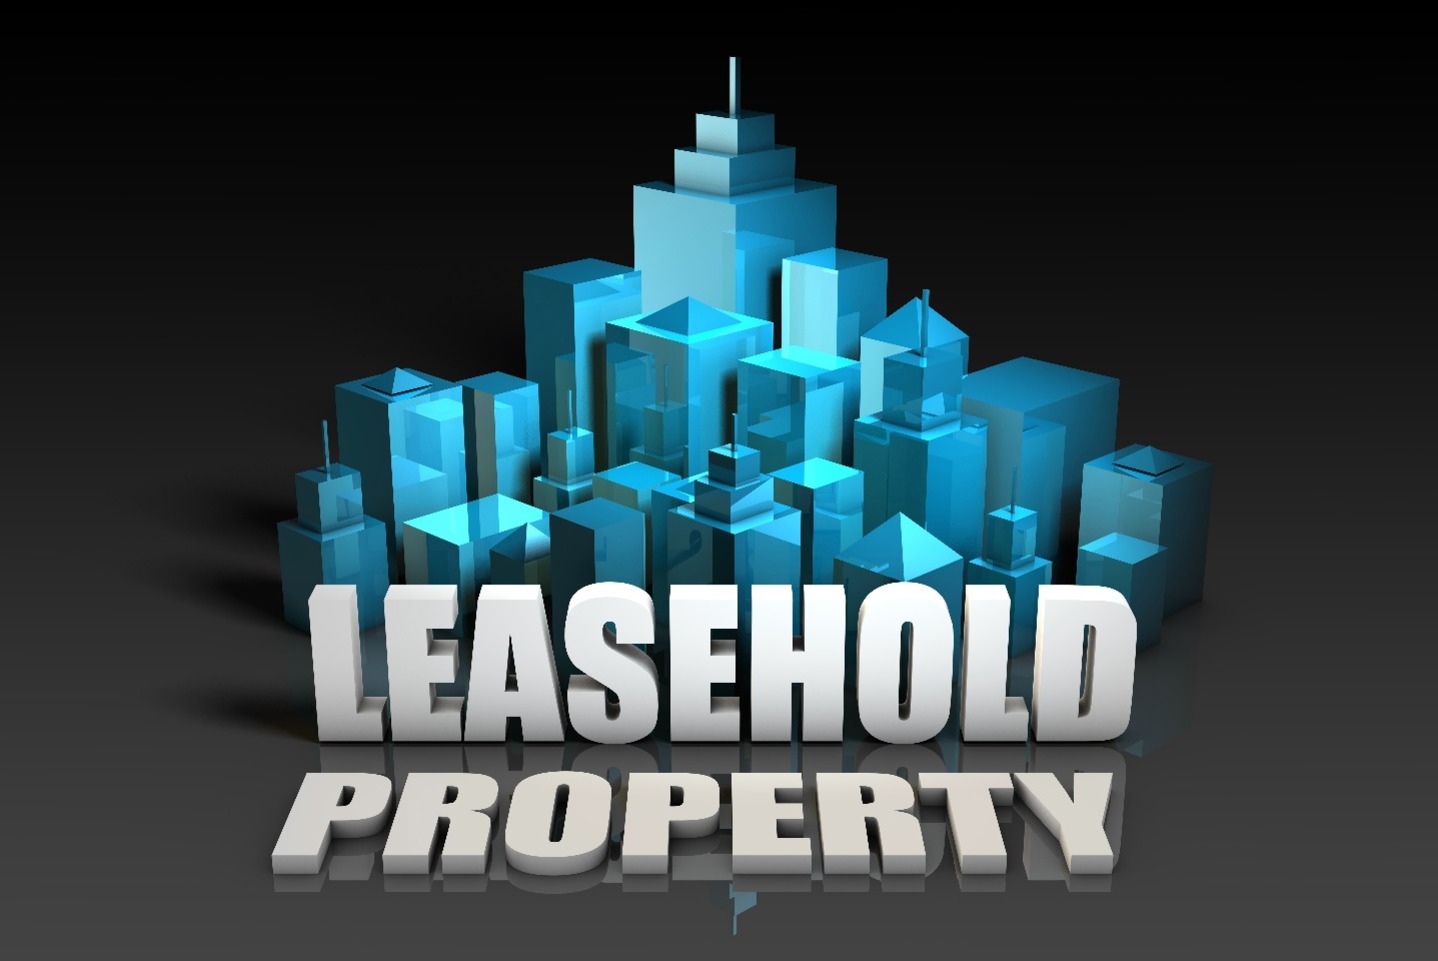 Leasehold Property.